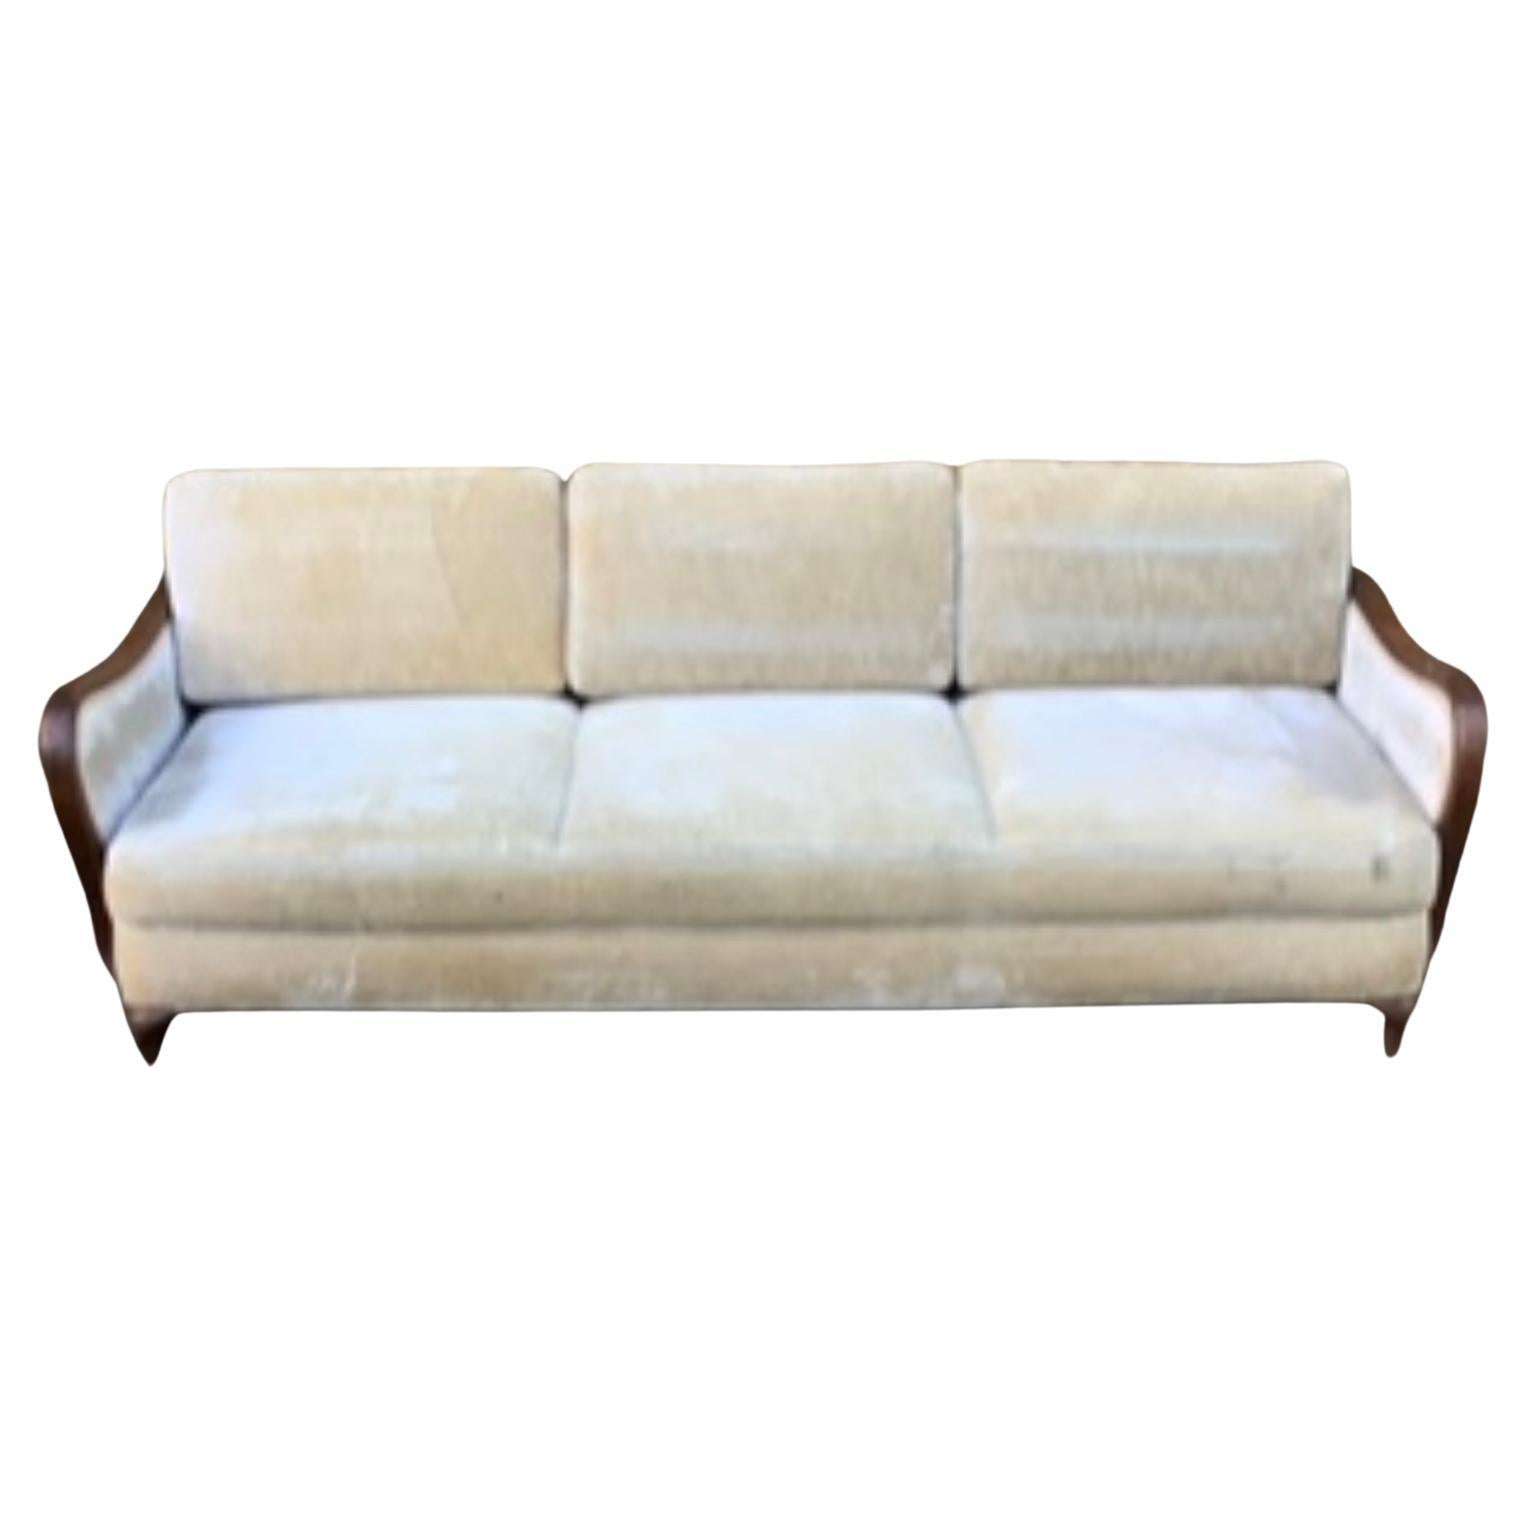 1930s, German, Sofa / Daybed For Sale